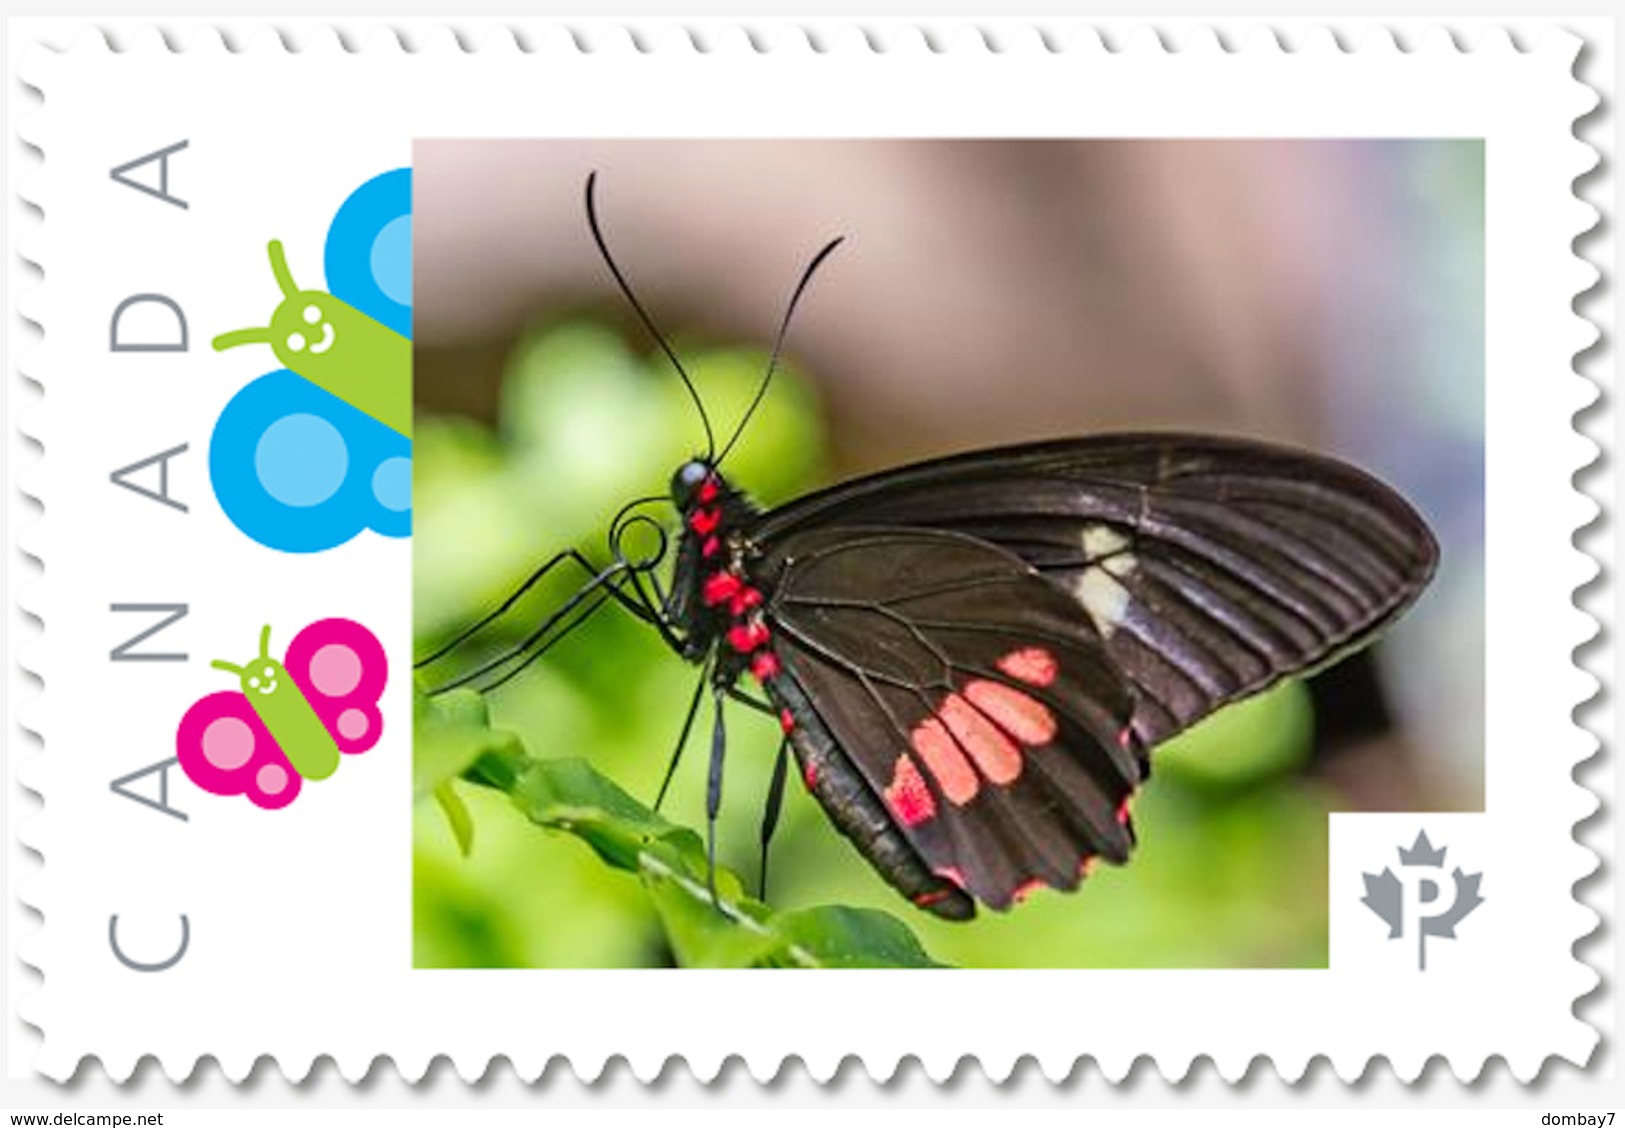 Brown/red BUTTERFLY, PAPILLON, SCHMETTERLING, FARFALLA, MARIPOSA,  MNH Postage Stamp Canada 2018 P18-06sn20 - Papillons